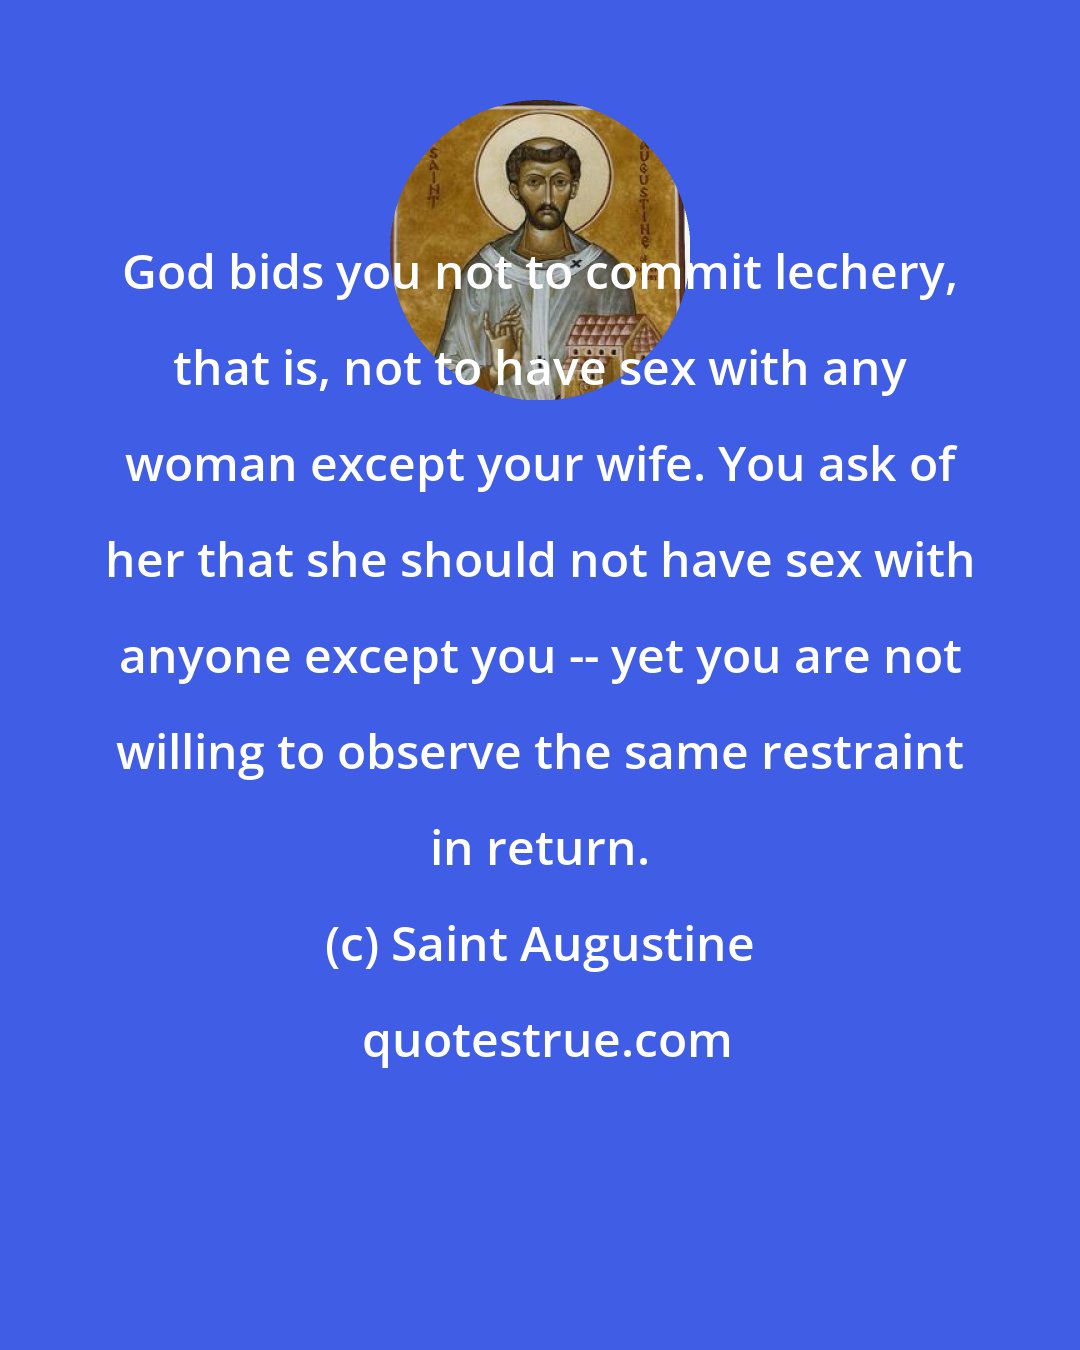 Saint Augustine: God bids you not to commit lechery, that is, not to have sex with any woman except your wife. You ask of her that she should not have sex with anyone except you -- yet you are not willing to observe the same restraint in return.